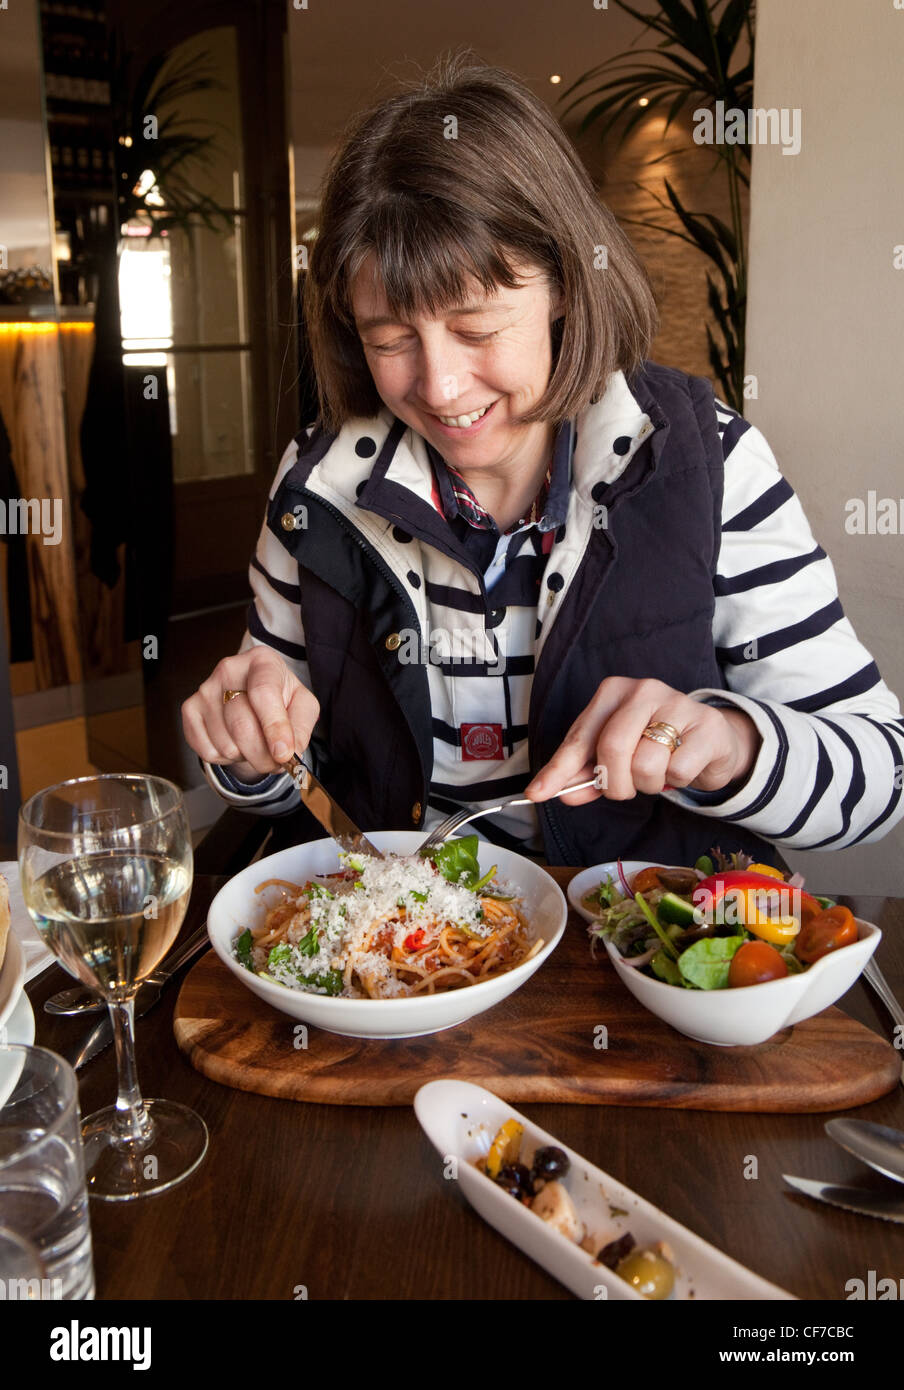 A woman eating a salad in a Prezzo restaurant, UK Stock Photo